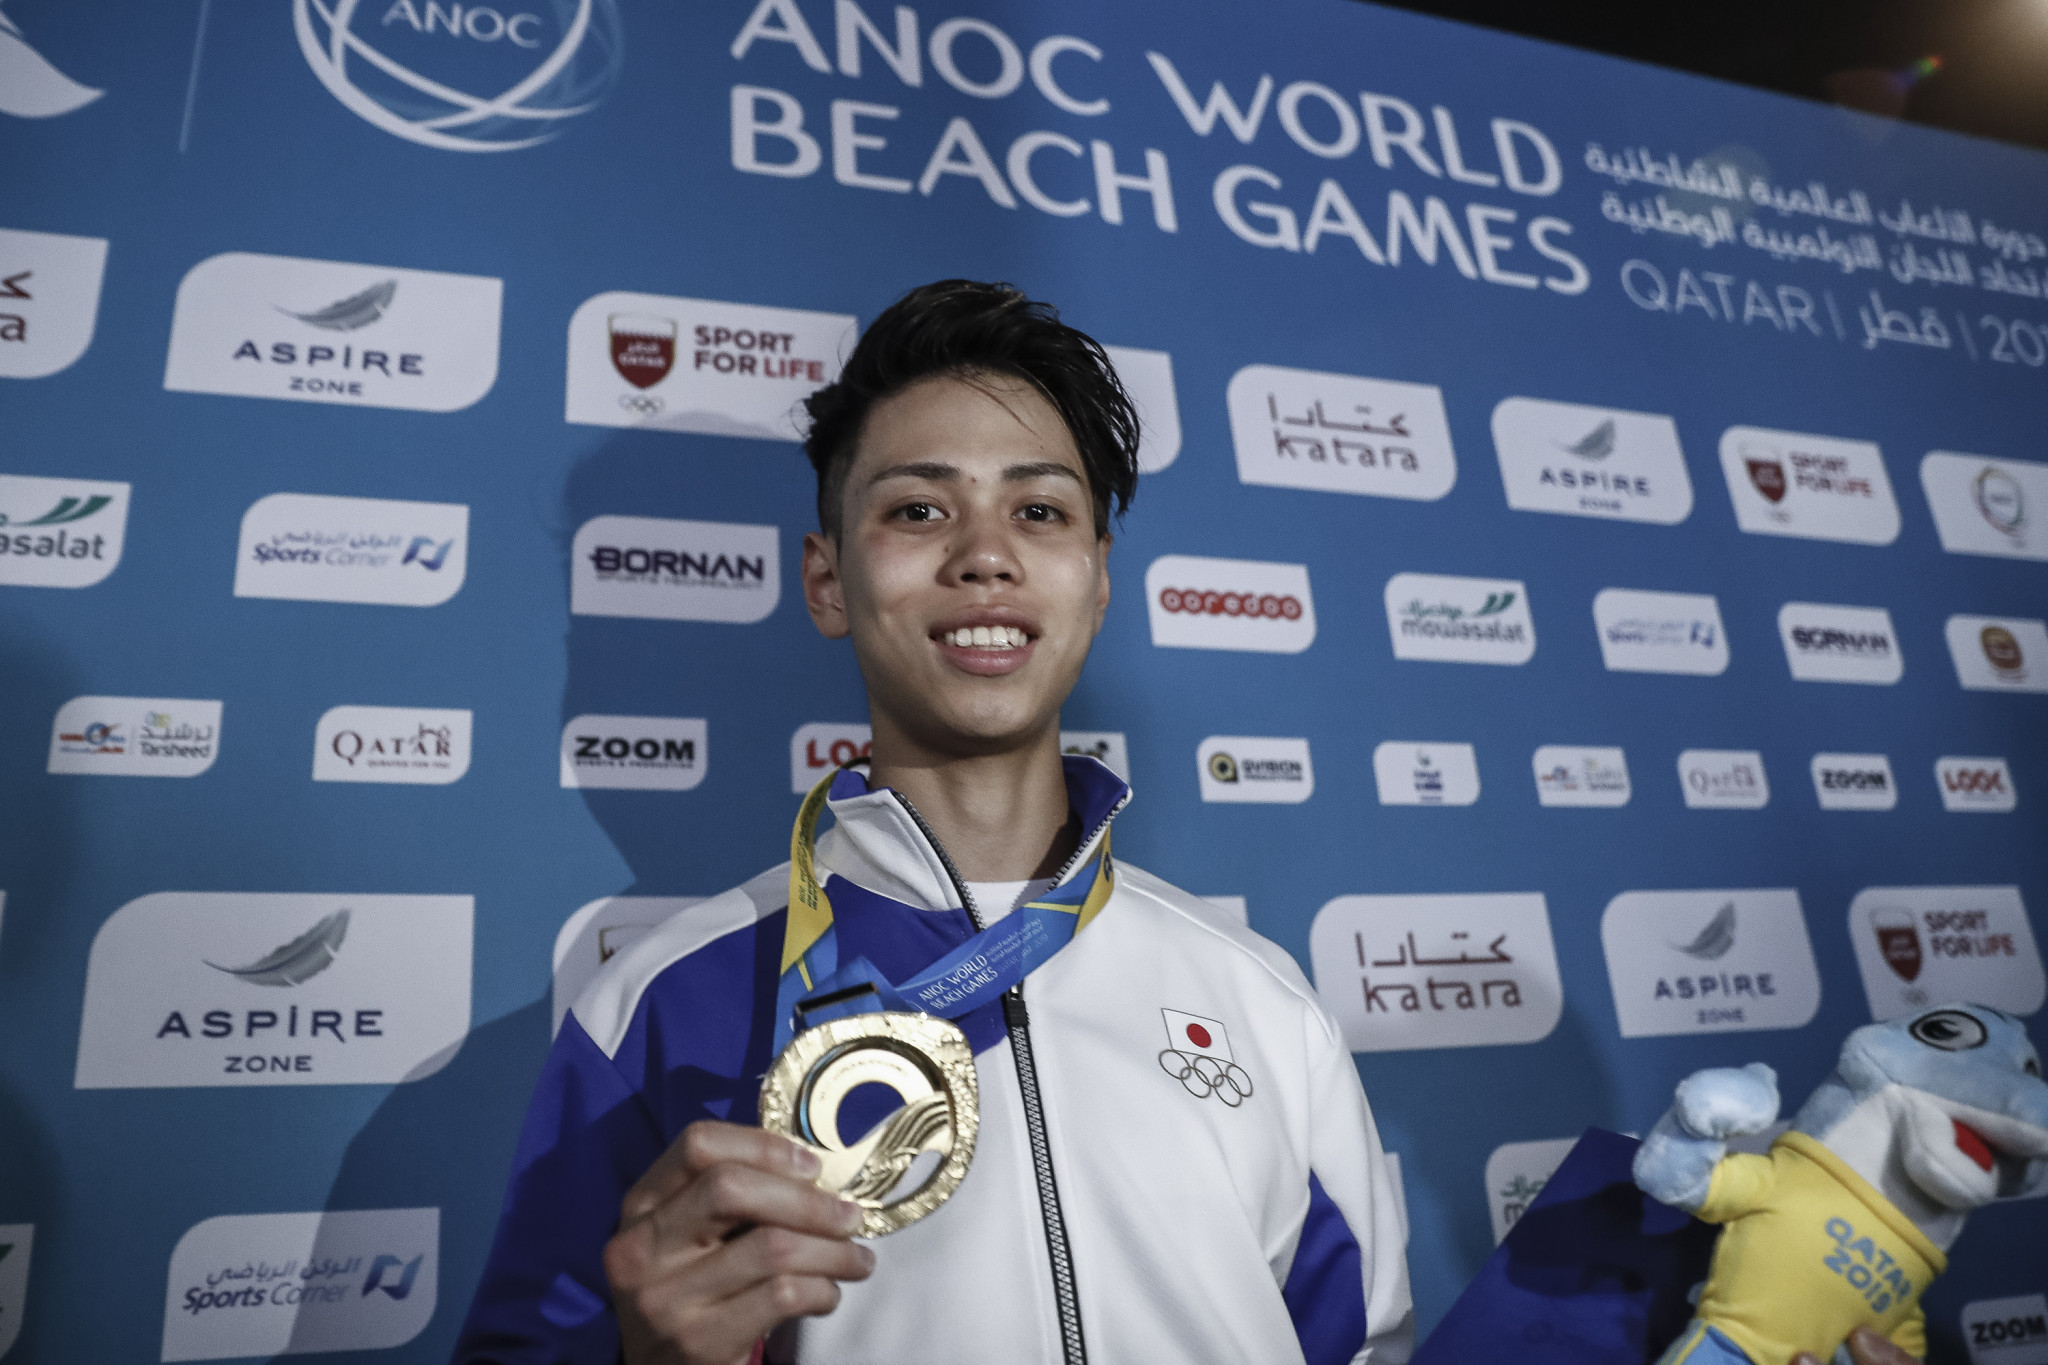 Kai Harada made it a Japanese double in the bouldering ©ANOC 